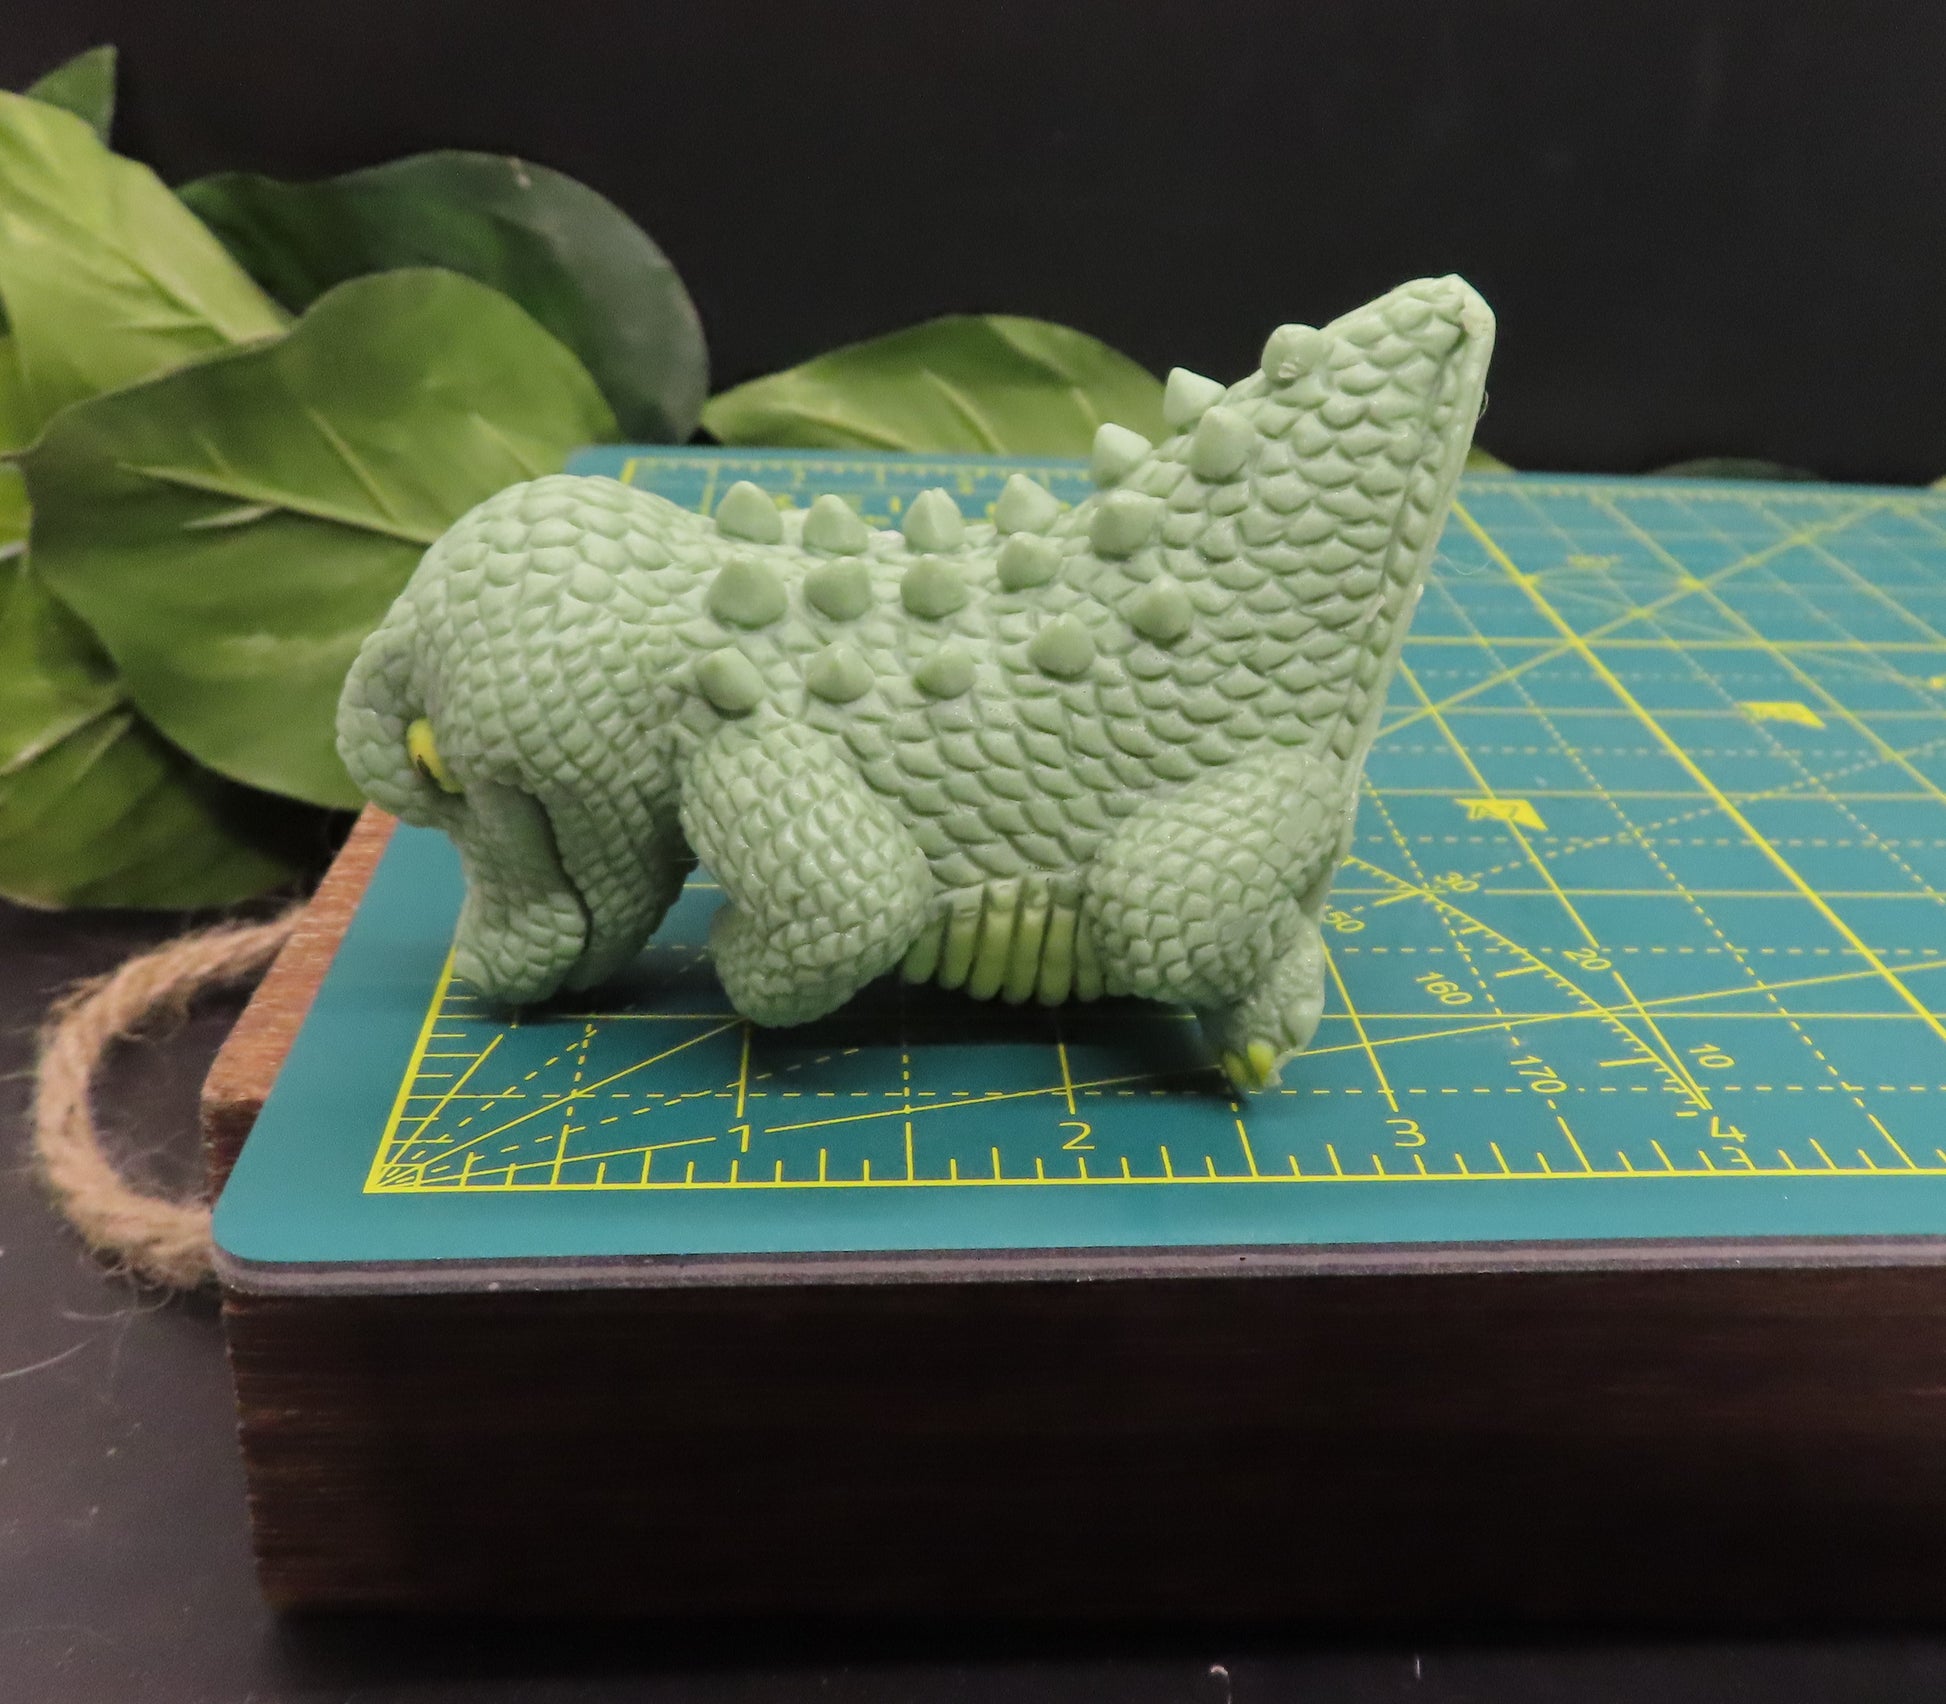 Aligator soap is 3 inches tall